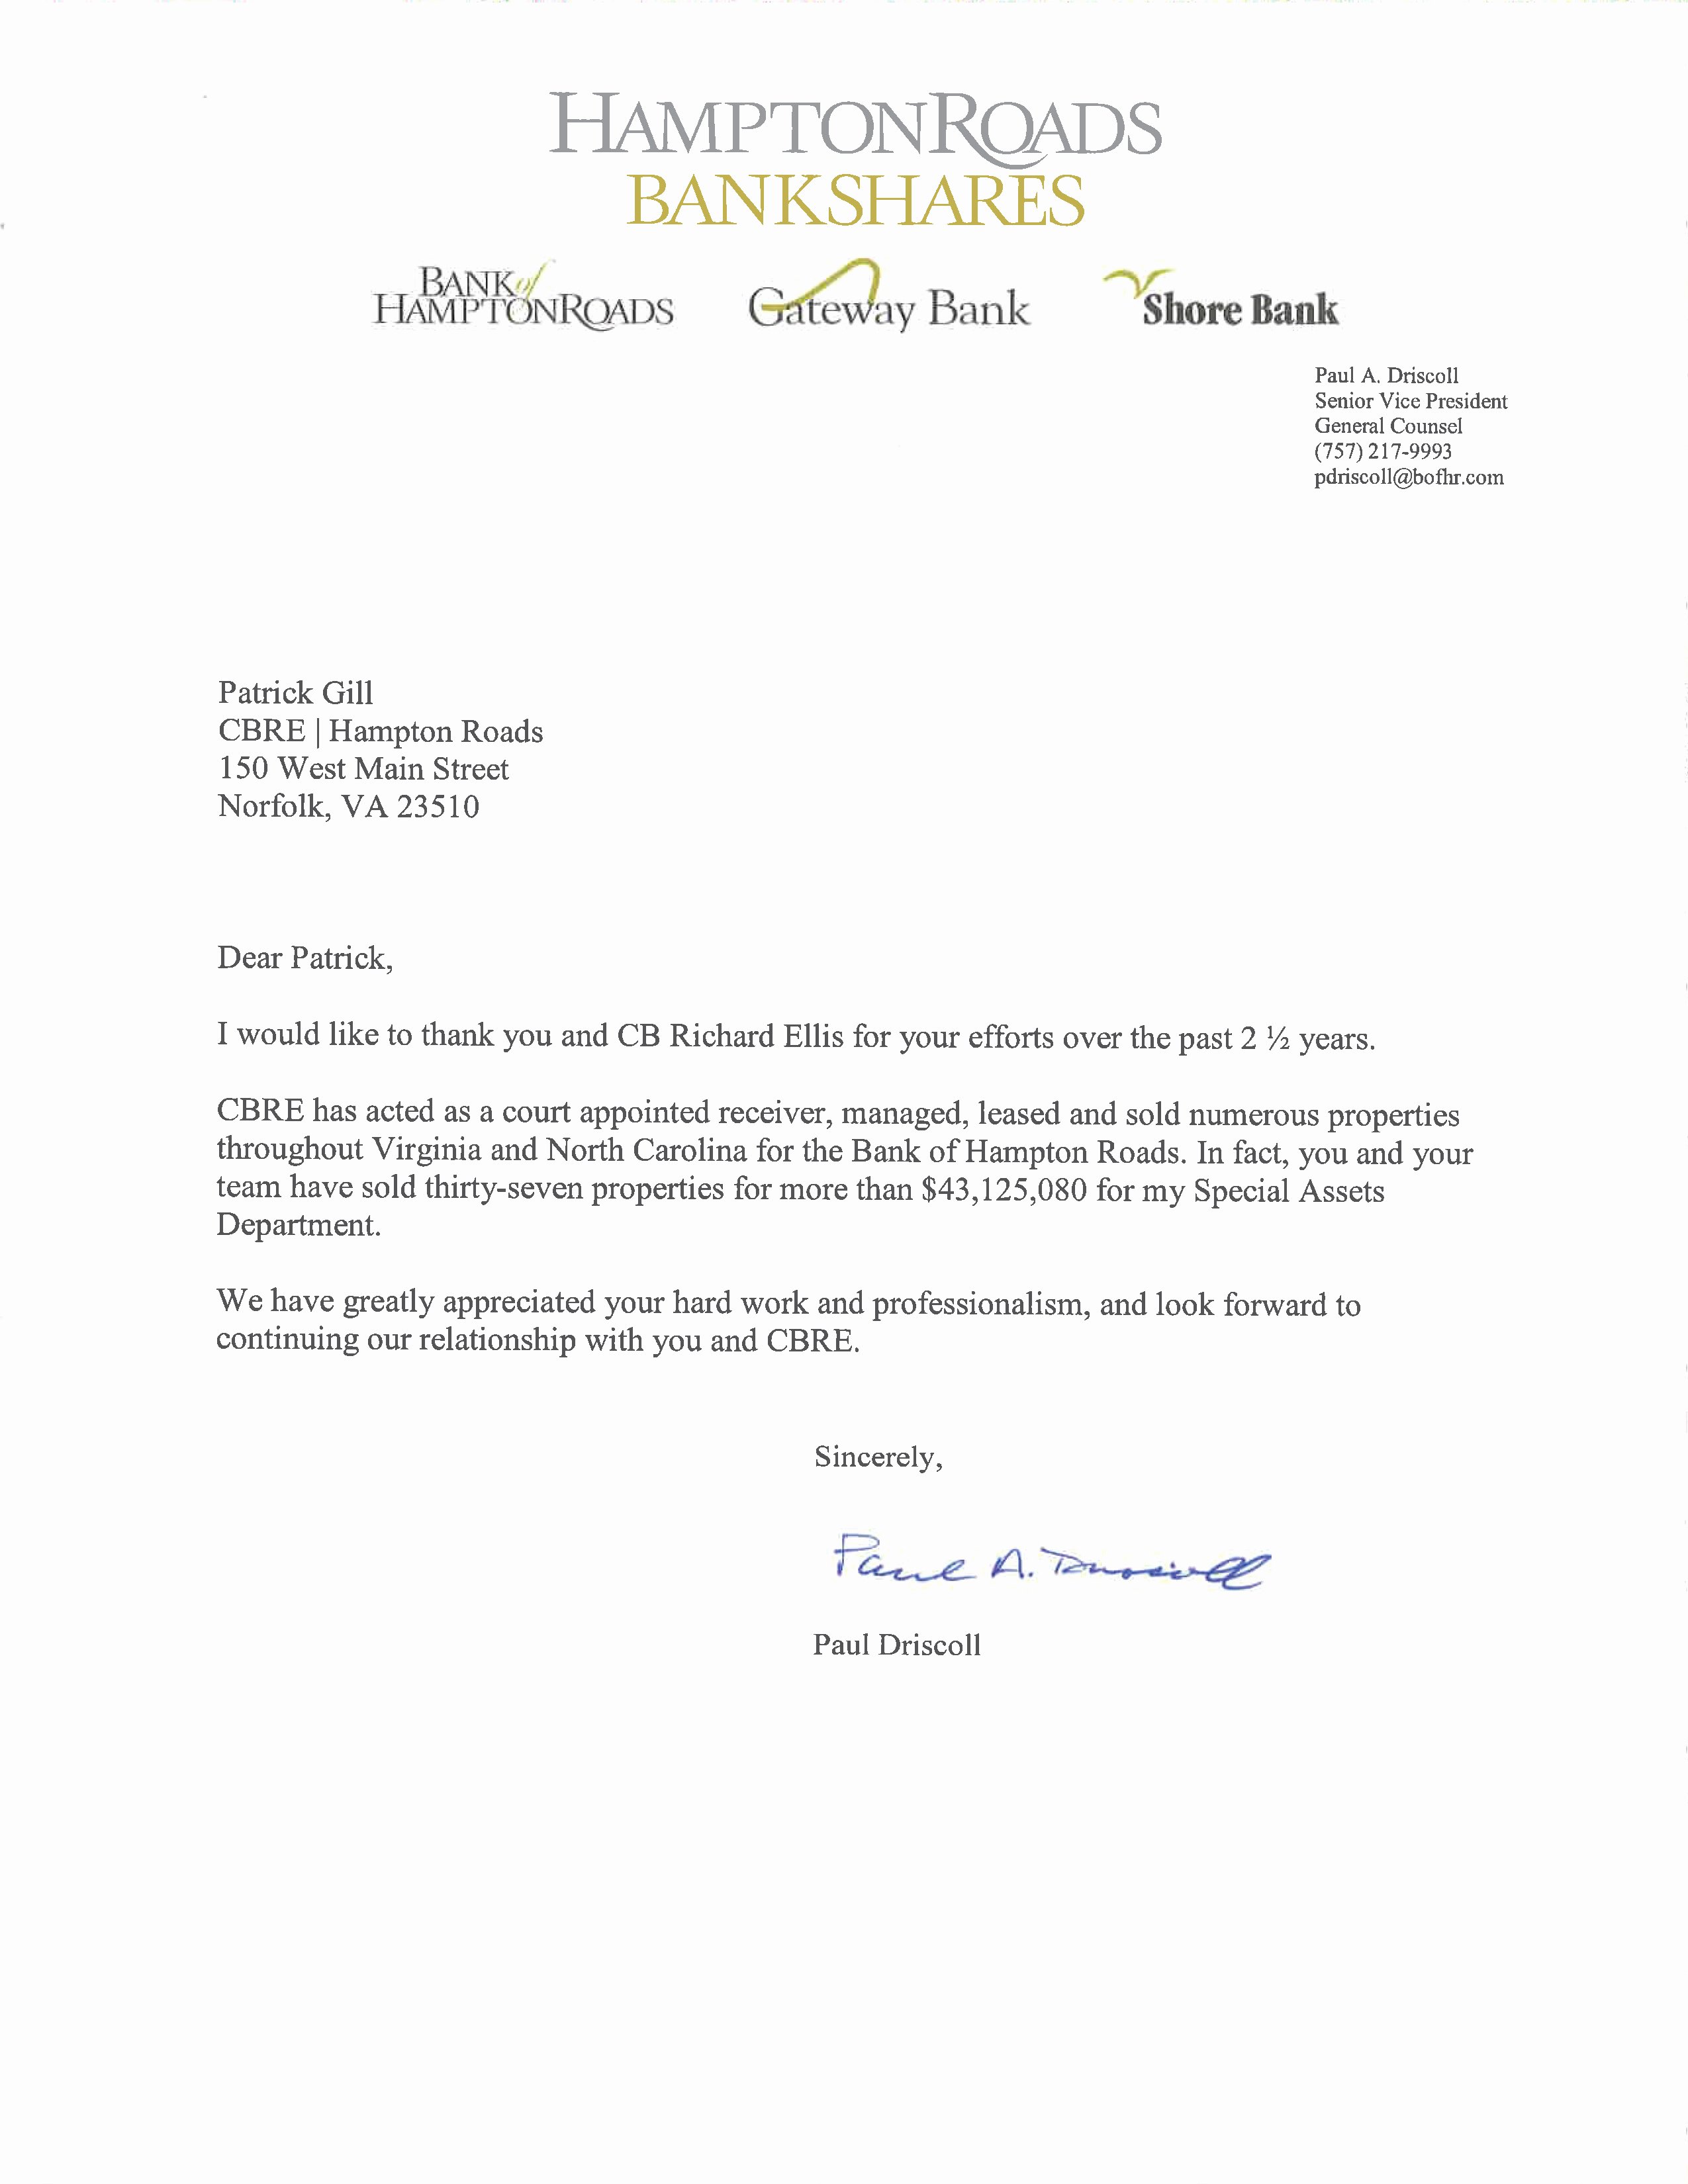 Do Letter Of Recommendation Luxury order Paper Writing Help 24 7 Employer Resume Bank